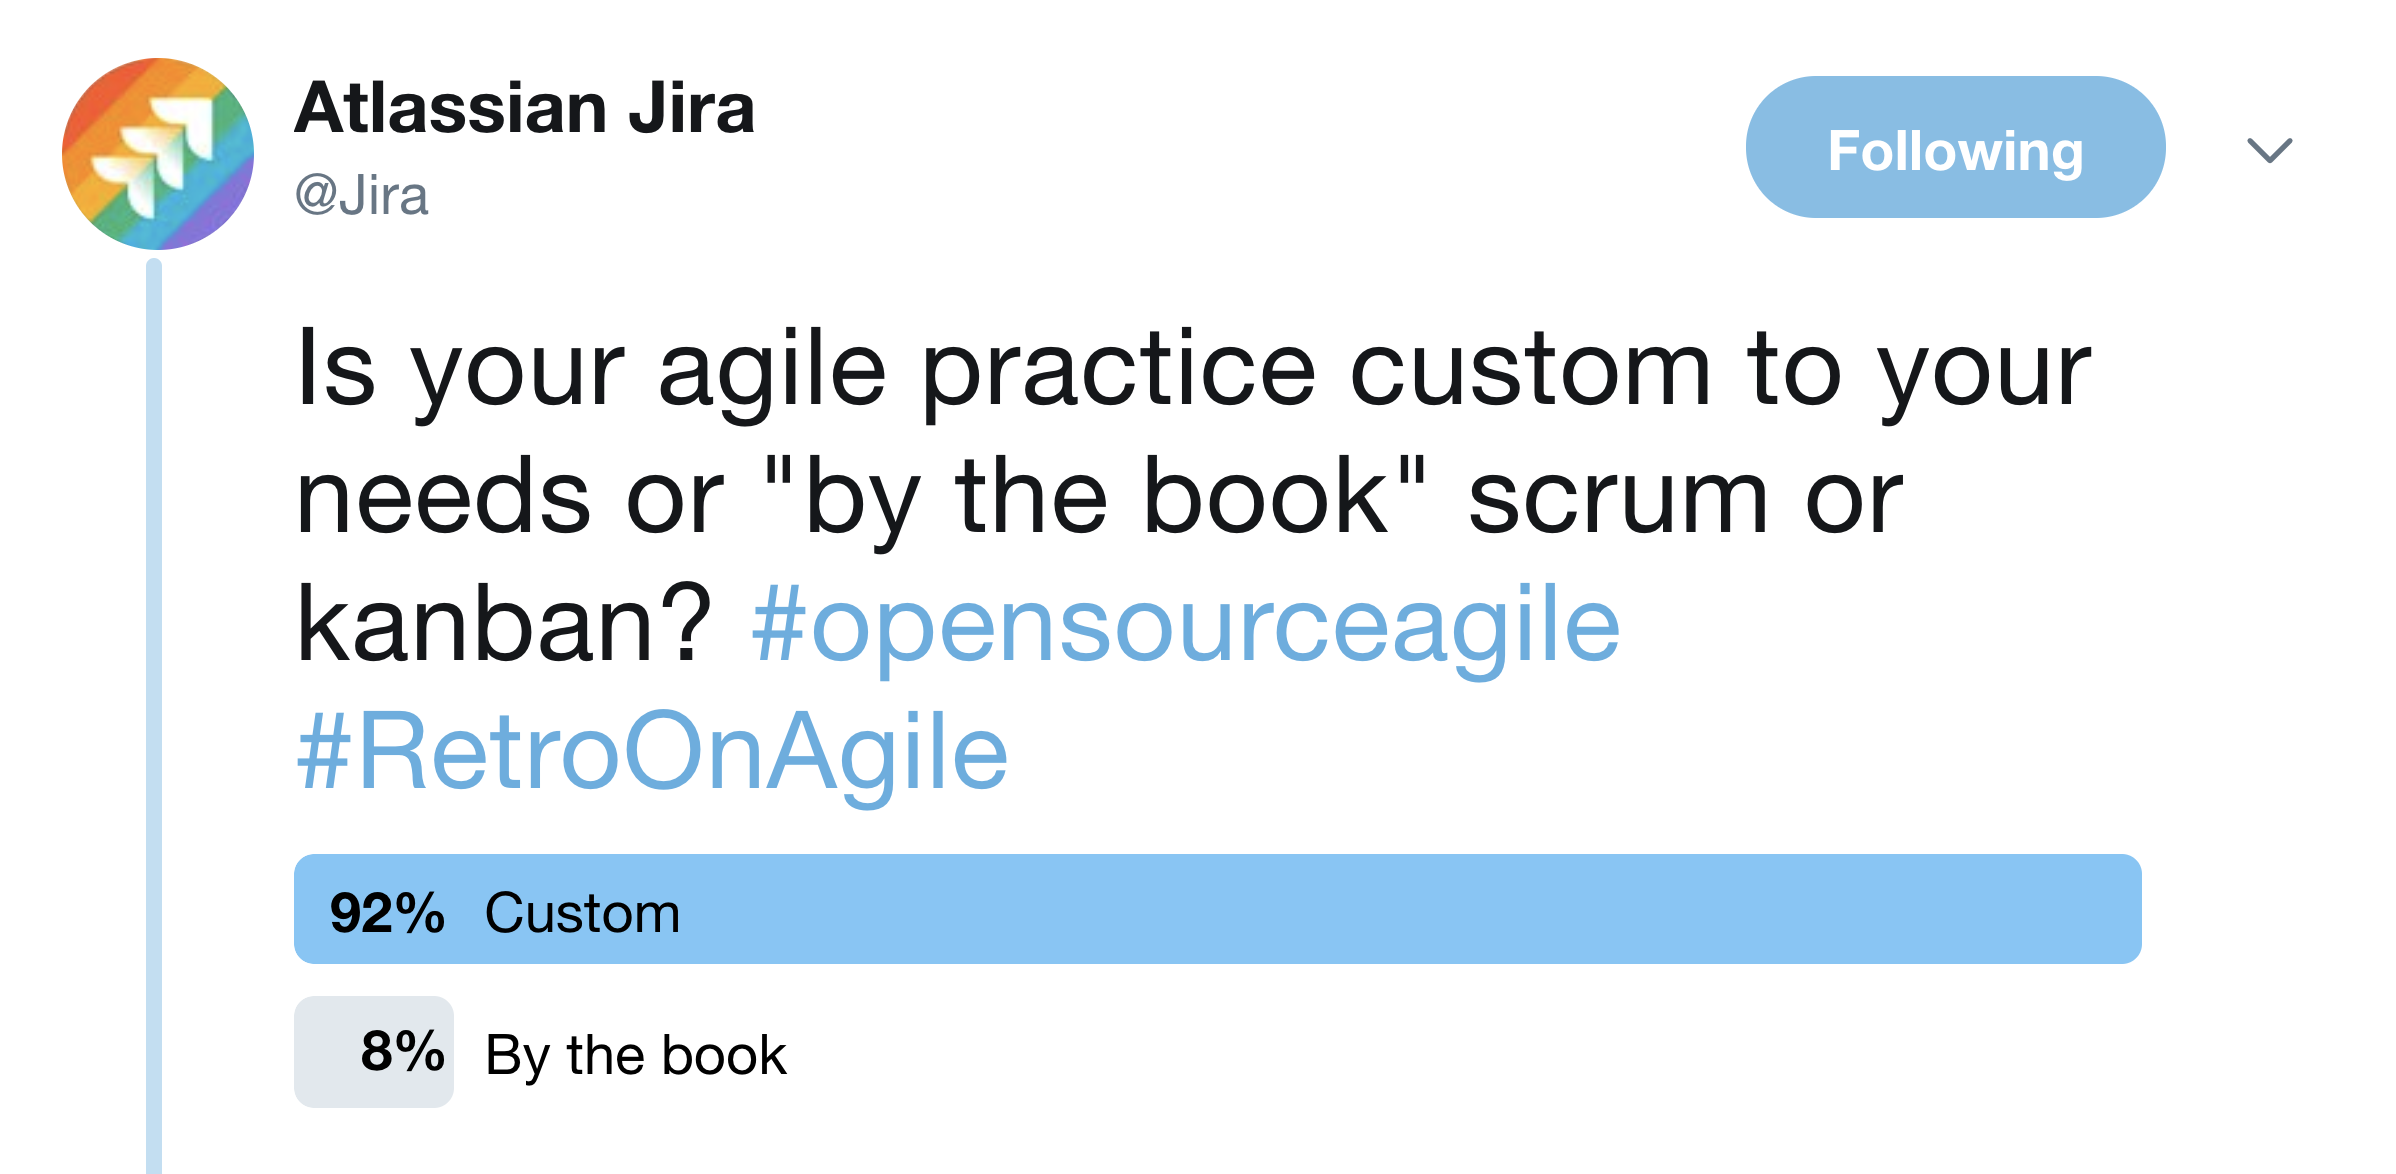 A poll asks 'Is your agile practice custom to your needs or by the book scrum or kanban? 92% say custom, 8% by the book.